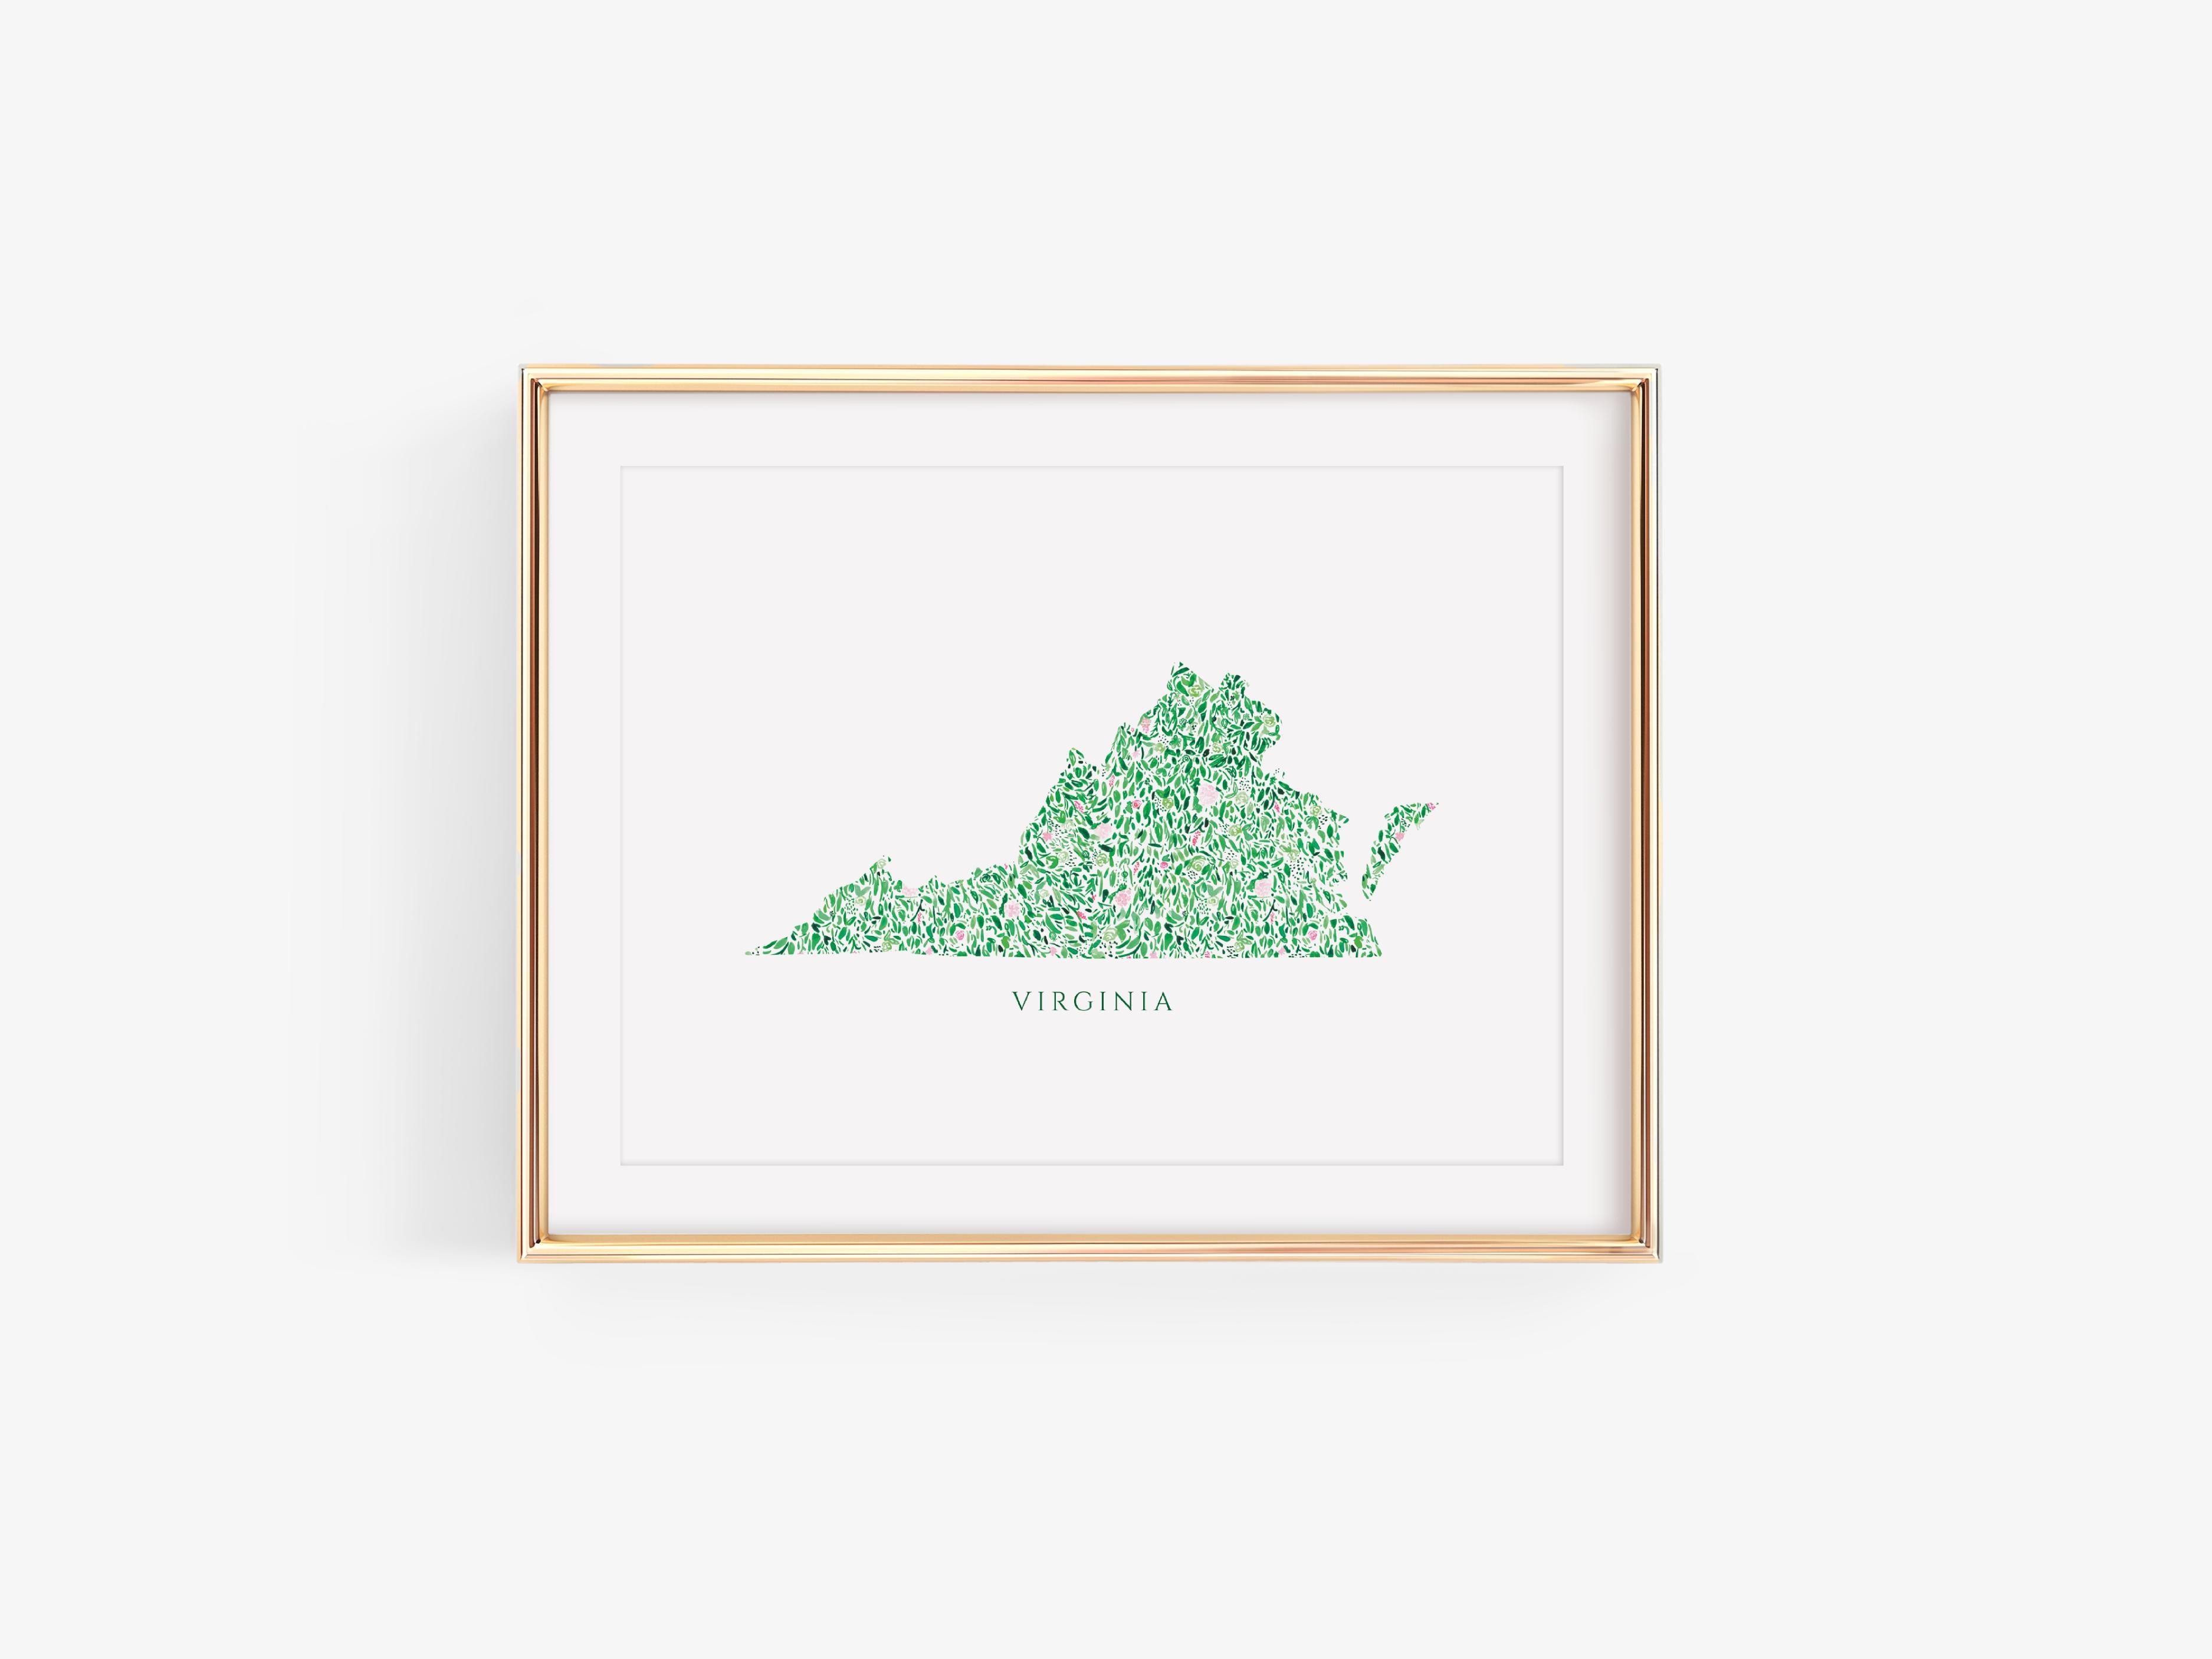 State of Virginia with Text Art Print-This watercolor art print features our hand-painted floral pattern in the shape of Virginia, printed in the USA on 120lb high quality art paper. This makes a great gift or wall decor for the Virginian lover in your life.-The Singing Little Bird